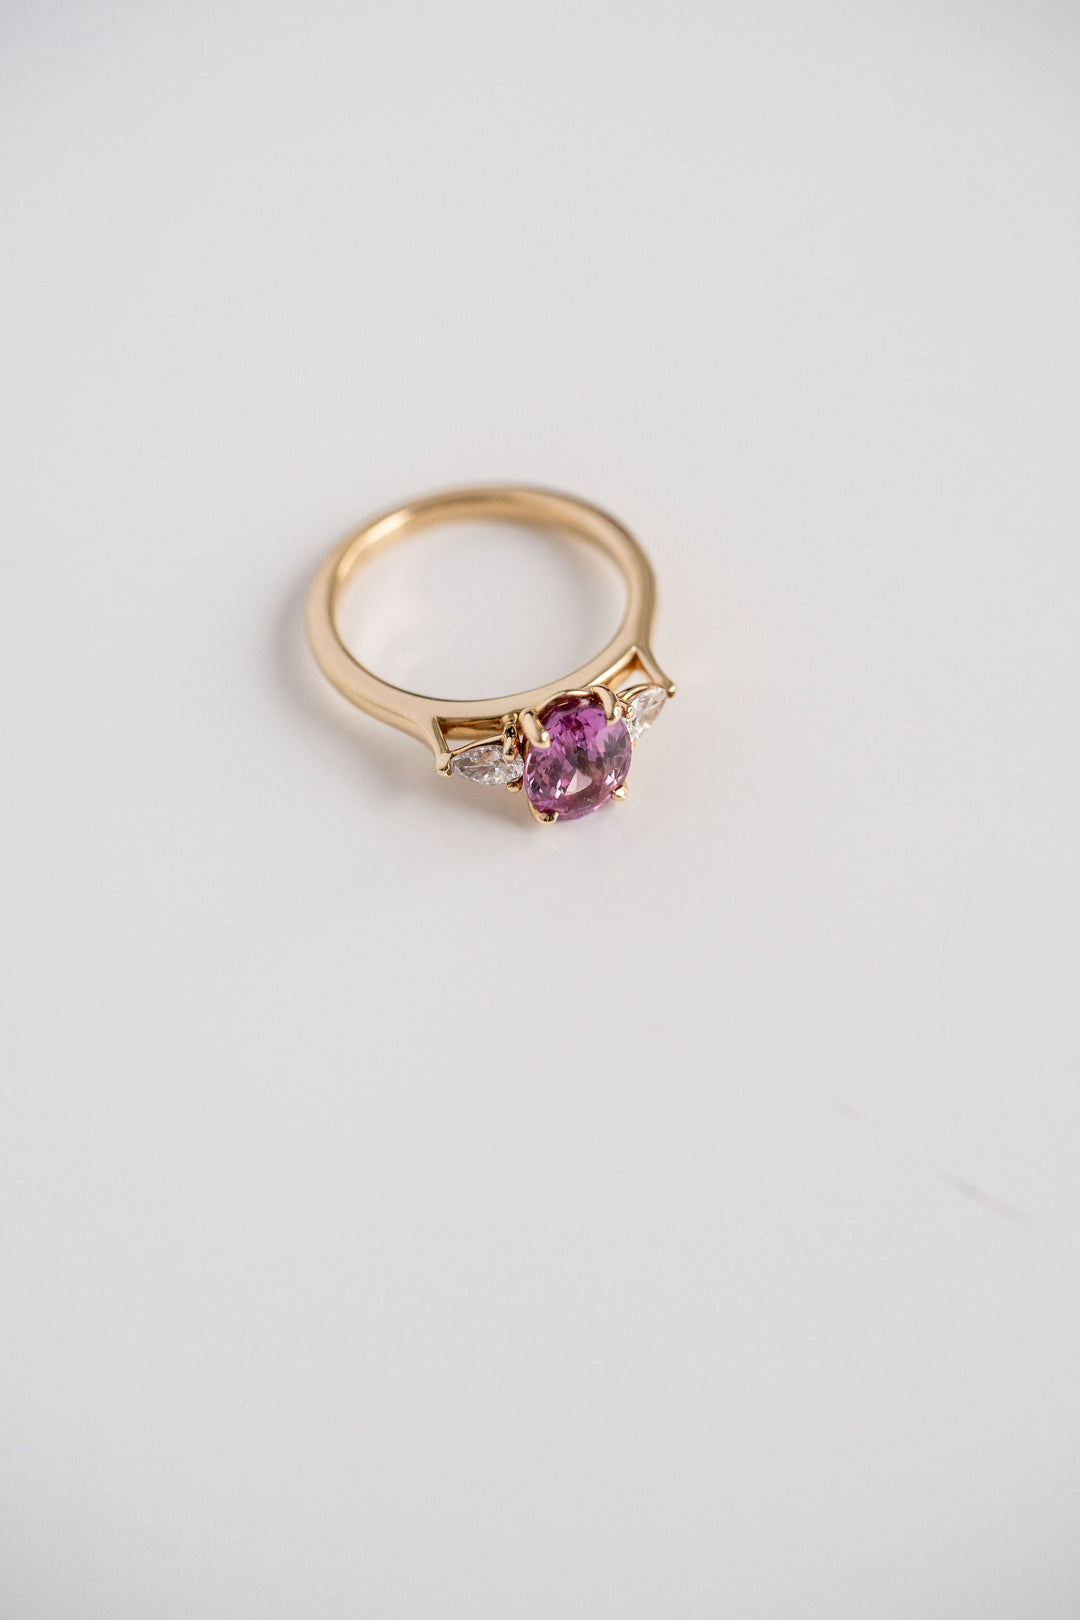 2.18ct. Vivid Pink Oval Sri Lankan Sapphire With Pear Shape Diamond Accents, 14k Yellow Gold